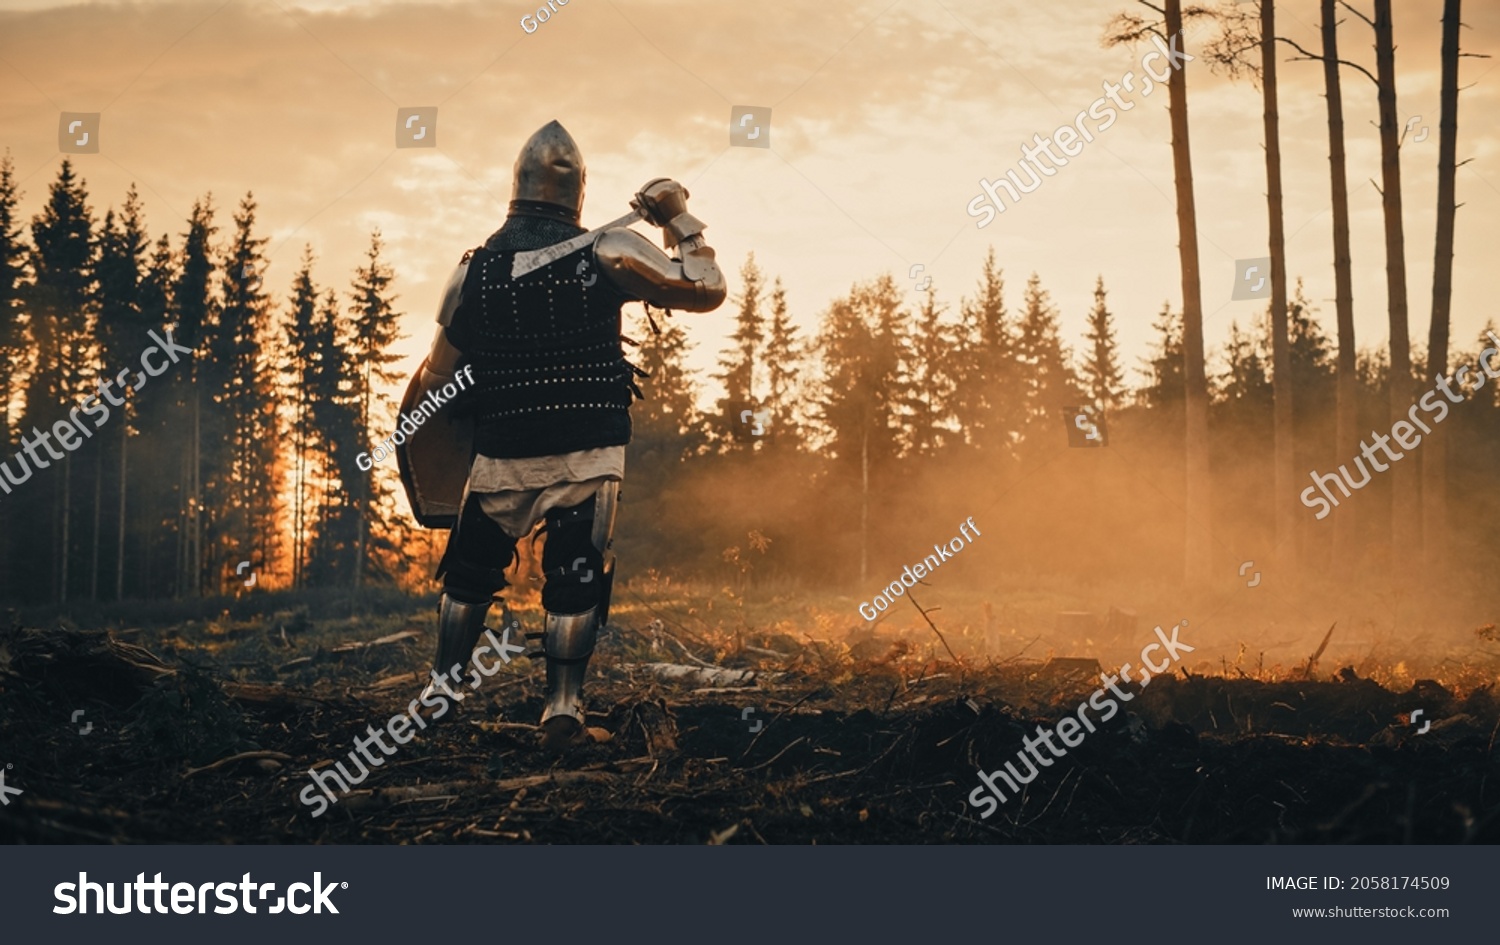 Medieval Knight Looking at Sunrise. Romantic Hero, Soldier, Warrior in Body Armour with Sword On a Journey to Safe Princess. Mysterious Smoke, Magic Forest and Adventure. Back View Shot #2058174509